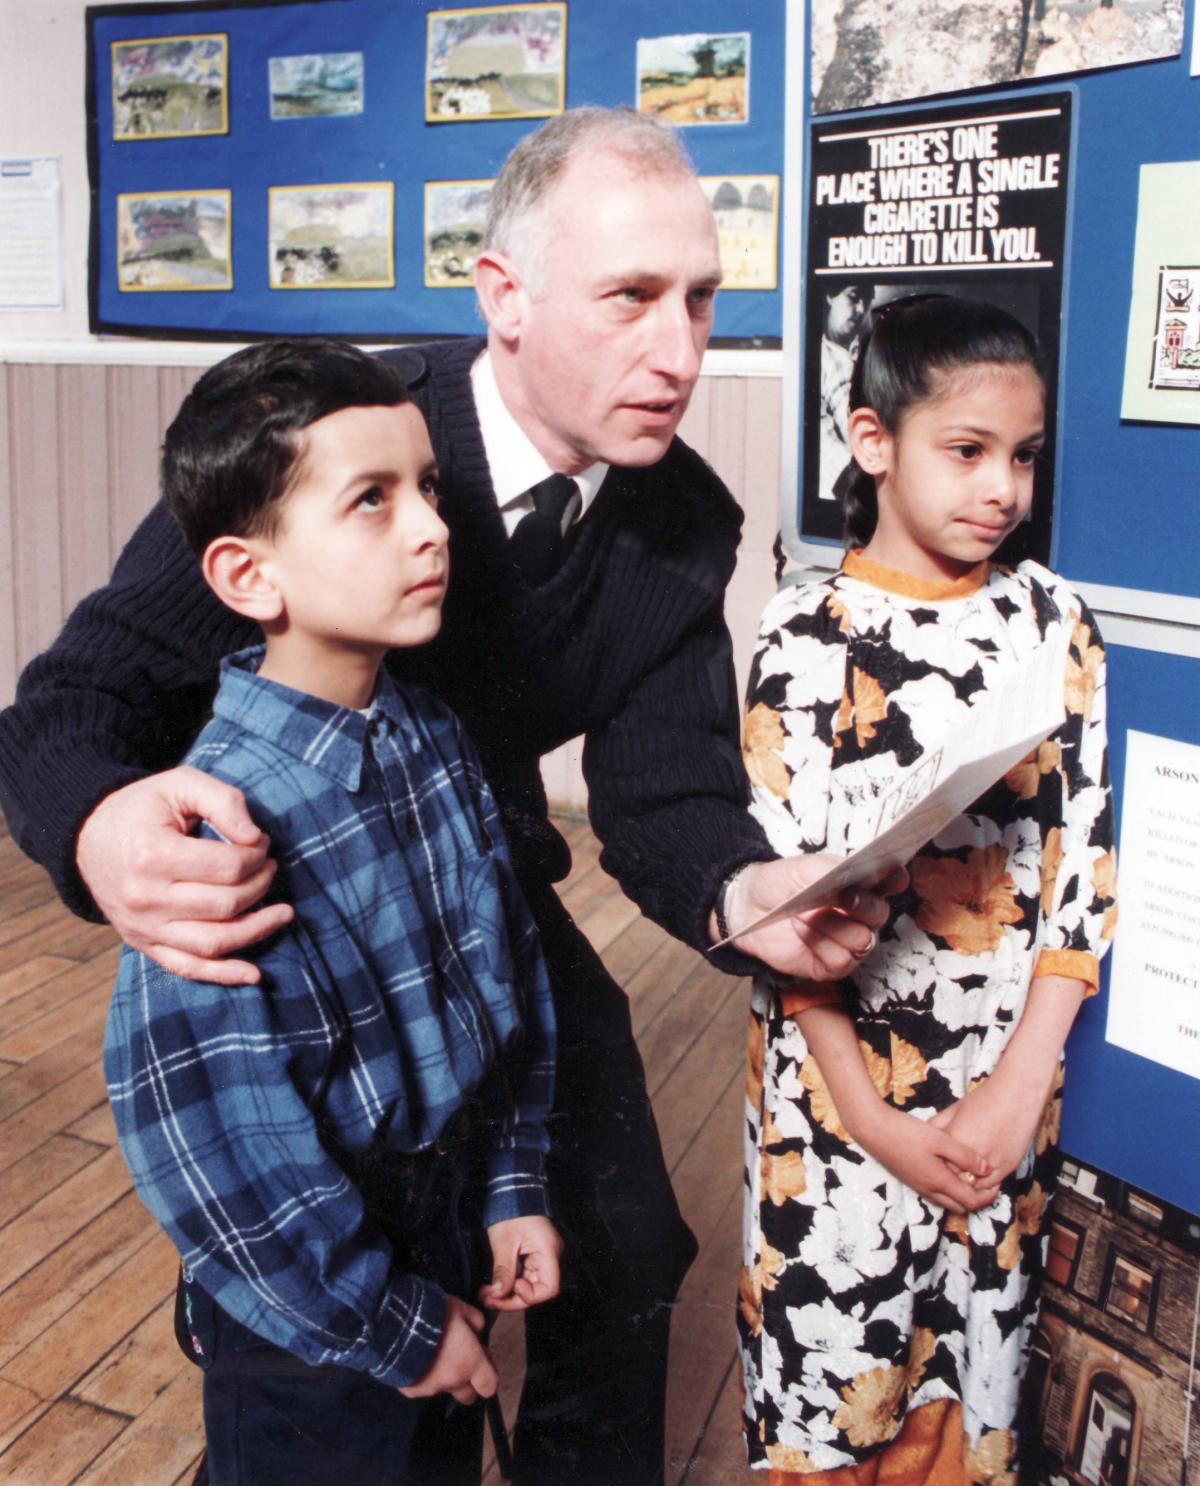 A ire officer giving talk at Grange First School 1995